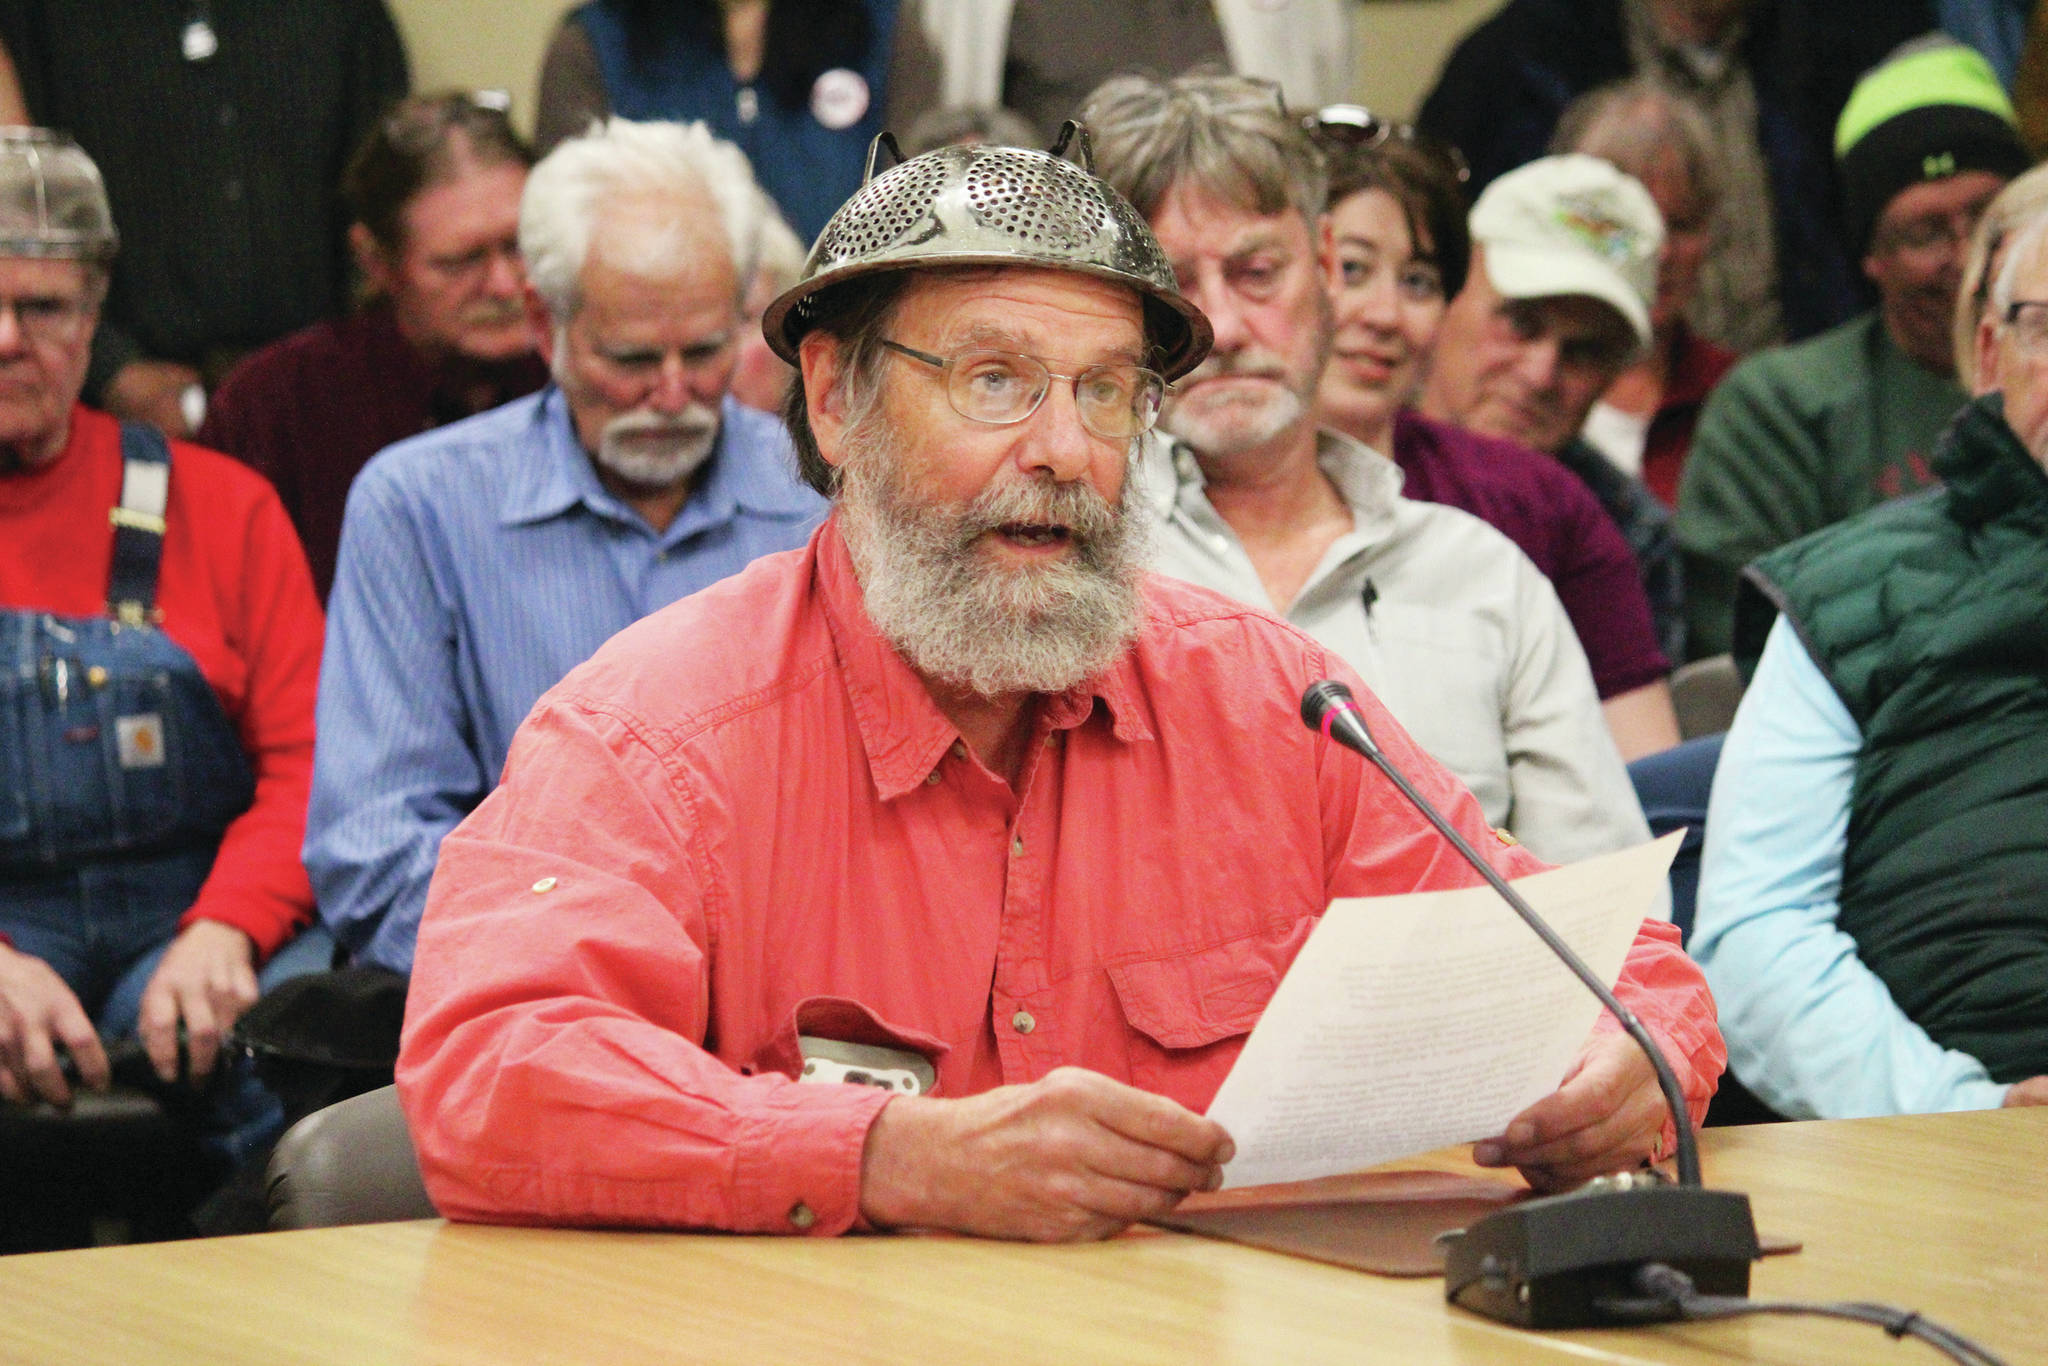 Megan Pacer/Homer News                                Frtiz Creek area resident Barrett Fletcher gives the invocation before a Tuesday Kenai Peninsula Borough Assembly meeting as a representative of the Church of the Flying Spaghetti Monster at Homer City Hall.